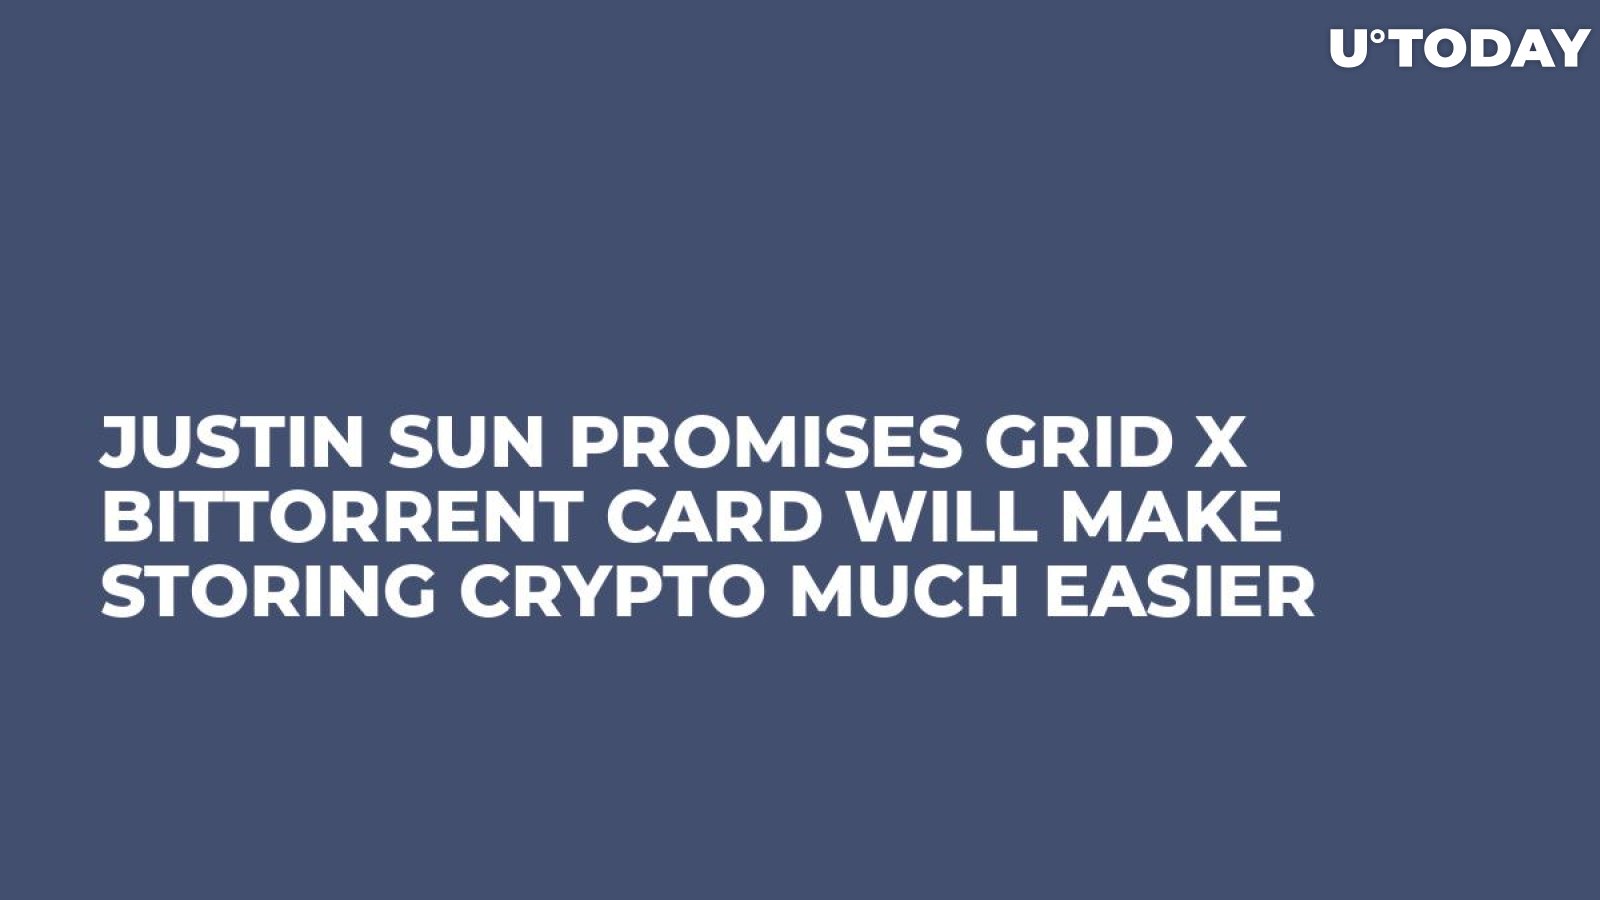 Justin Sun Promises GRID X BitTorrent Card Will Make Storing Crypto Much Easier